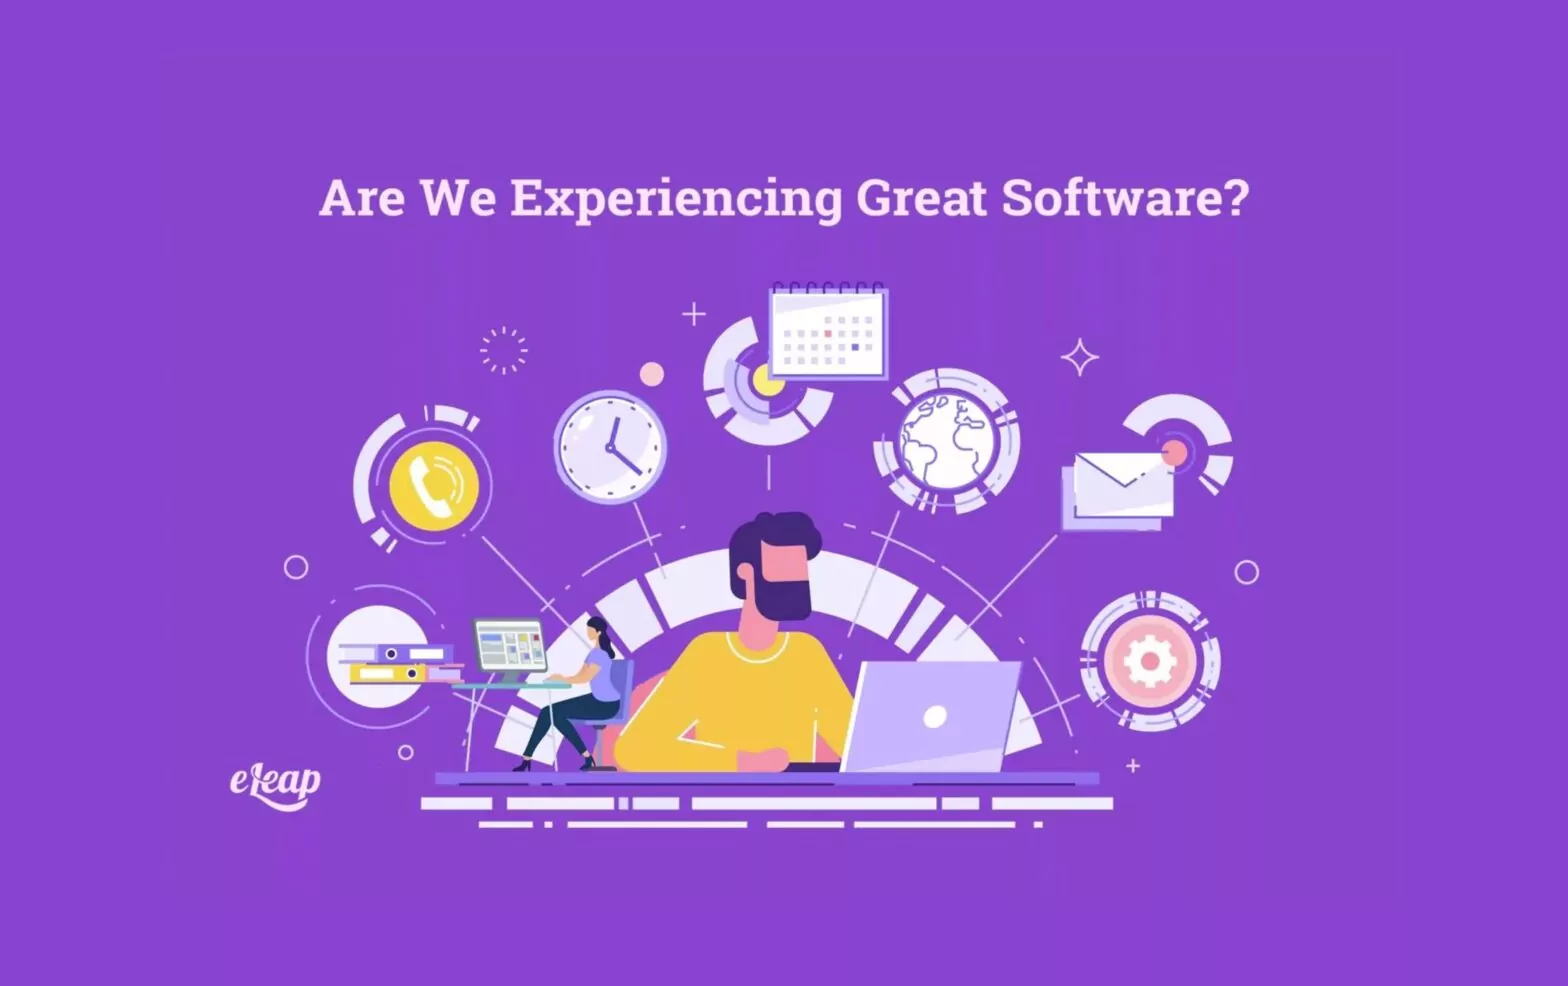 Are We Experiencing Great Software?